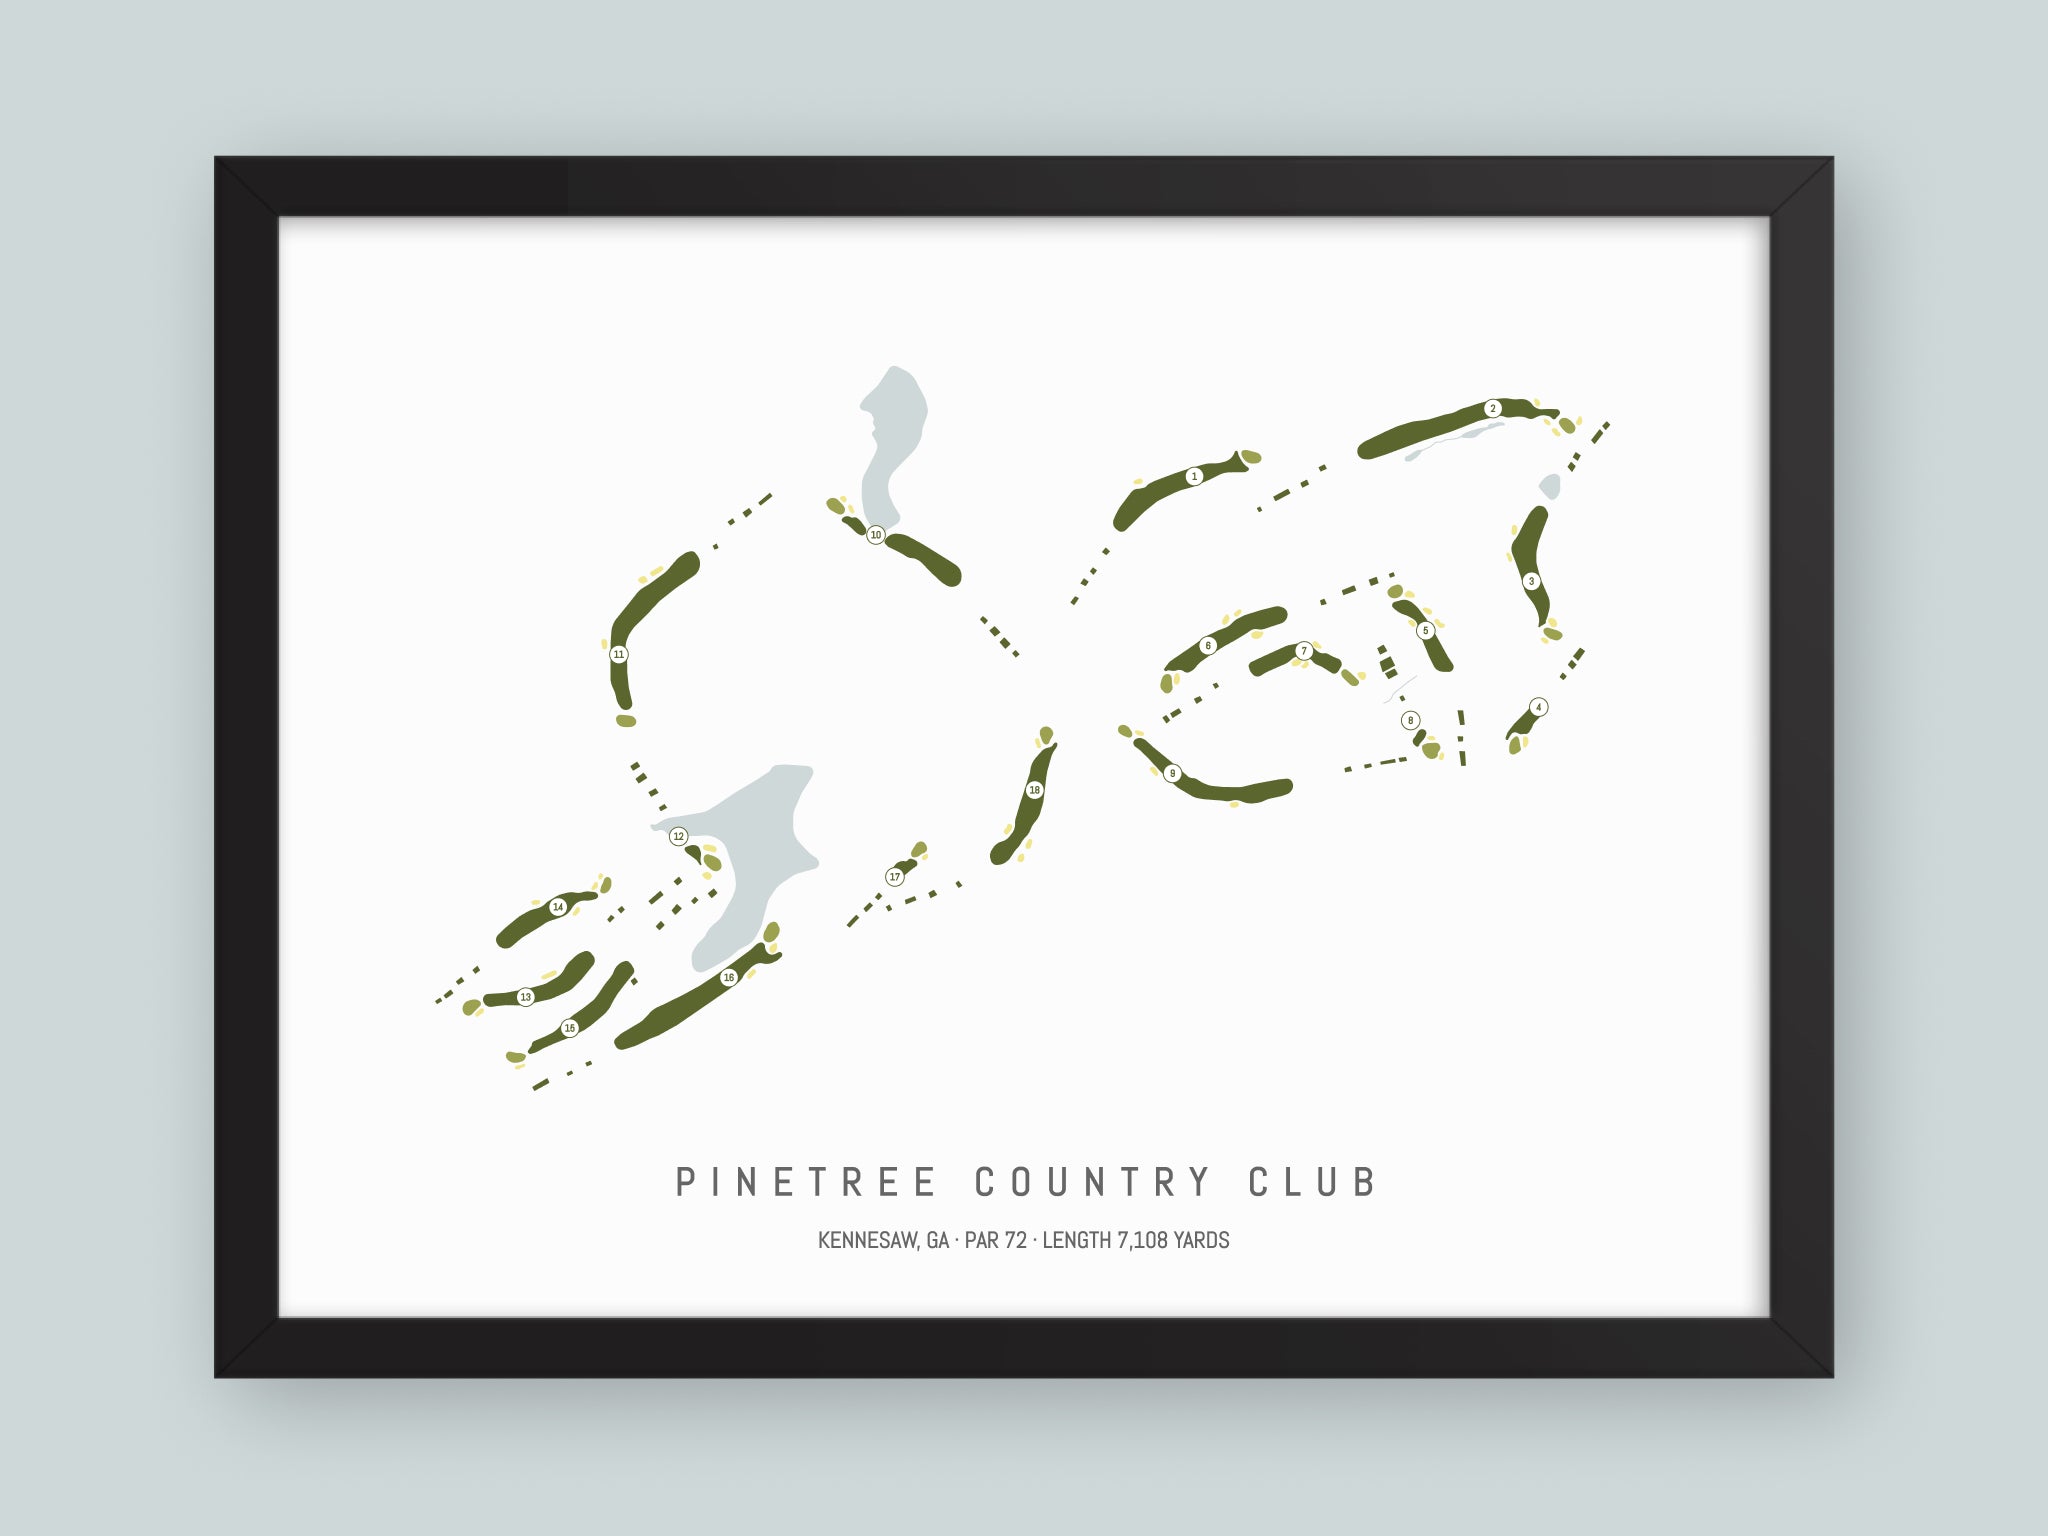 Pinetree-Country-Club-GA--Black-Frame-24x18-With-Hole-Numbers